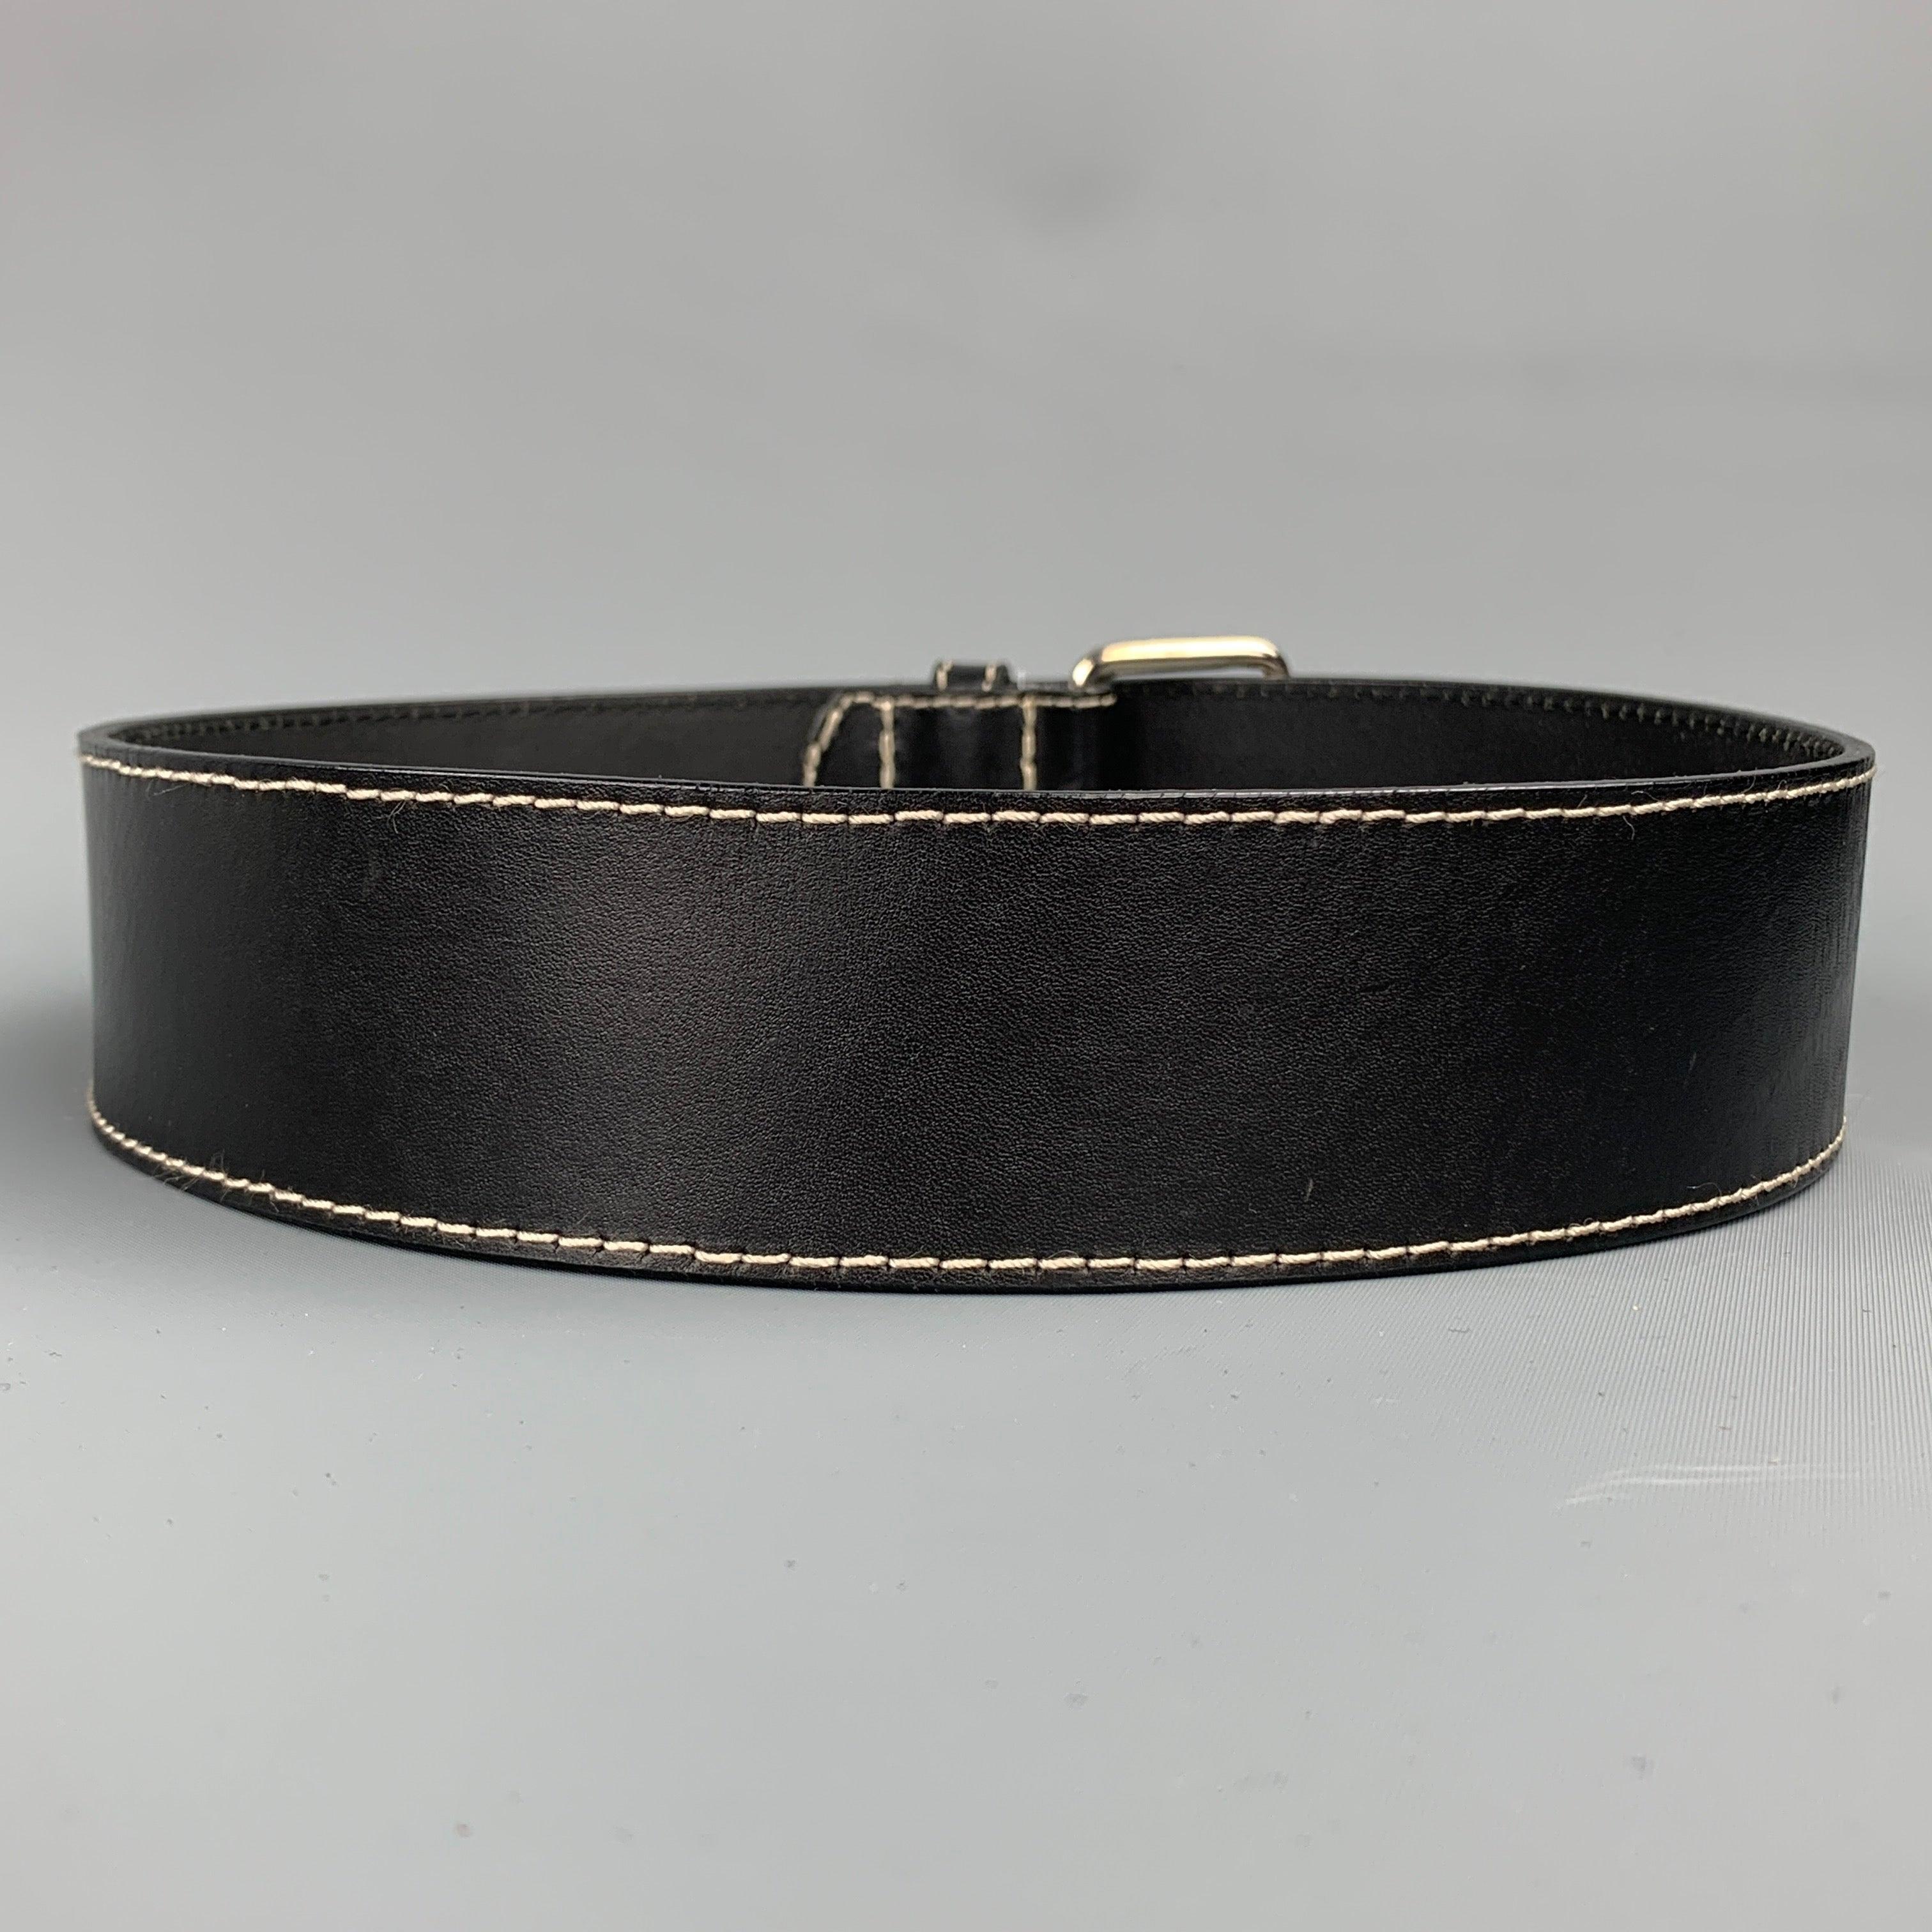 IVAN GRUNDAHL Waist Size 31 Black Leather Belt In Good Condition For Sale In San Francisco, CA